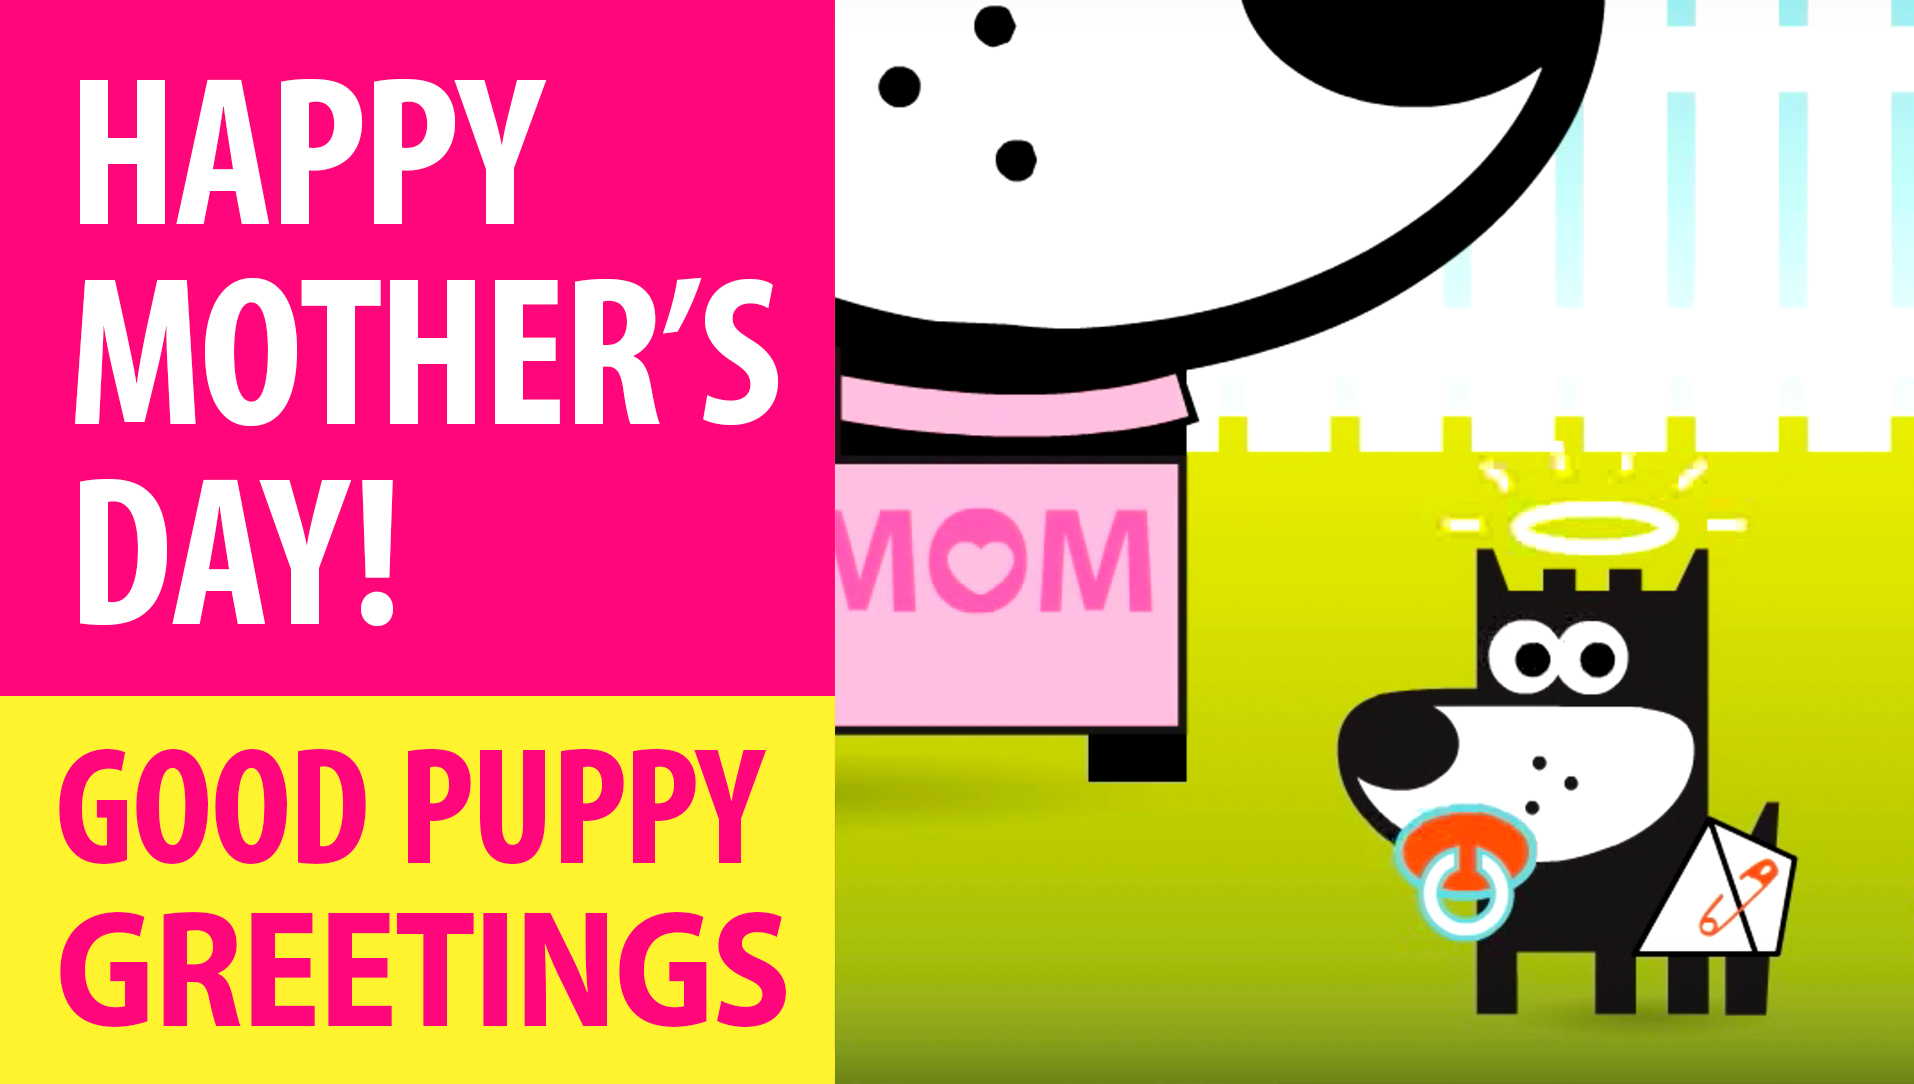 GOOD PUPPY . ANIMATED E-CARDS . Happy Mother's Day! .